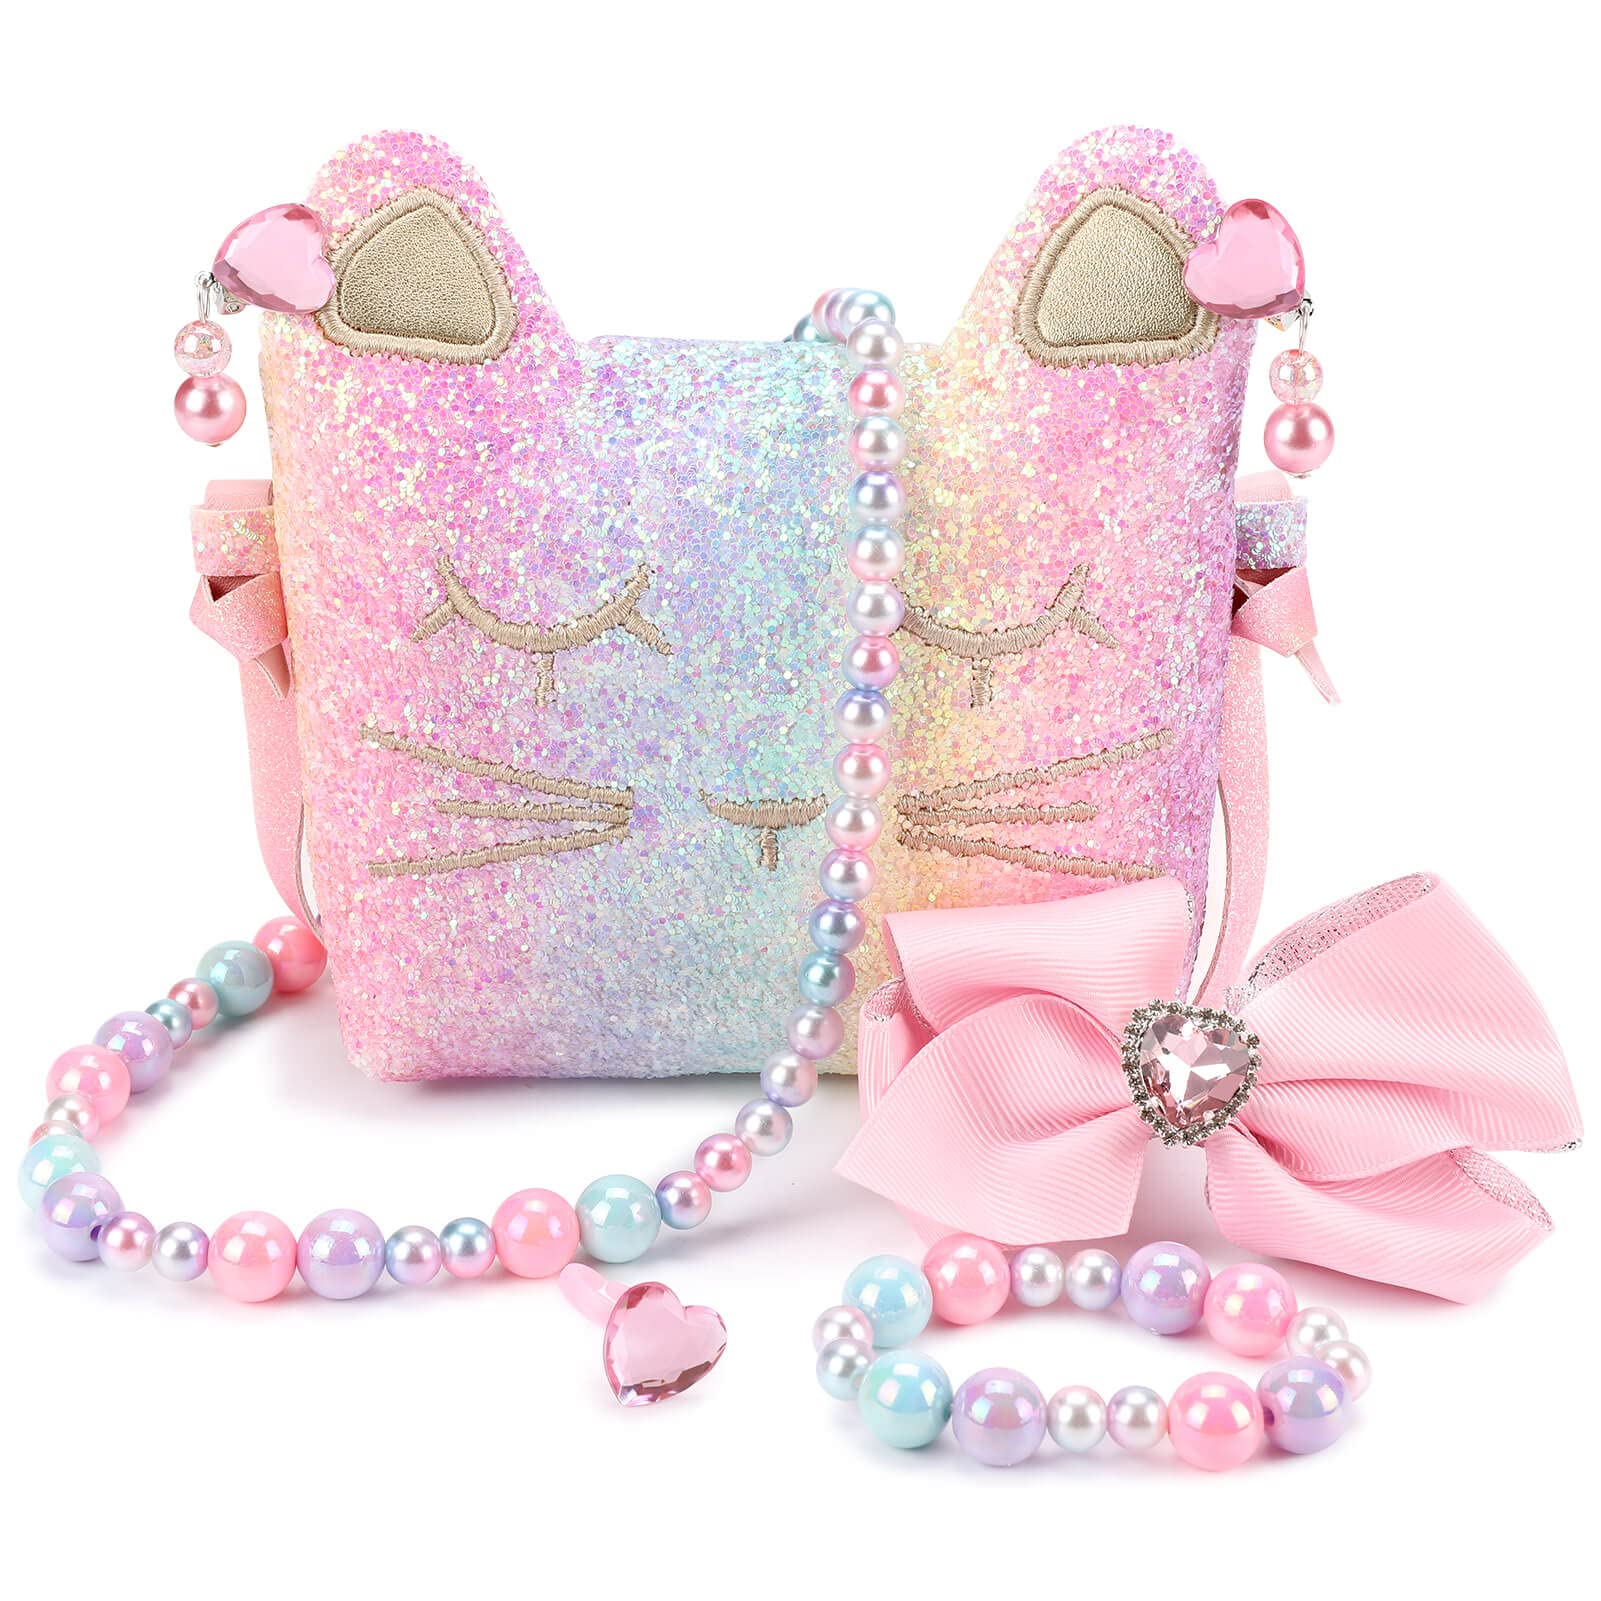 mibasies Purse for Little Girls Dress Up Jewelry Pretend Play Kids Accessories Gifts Presents